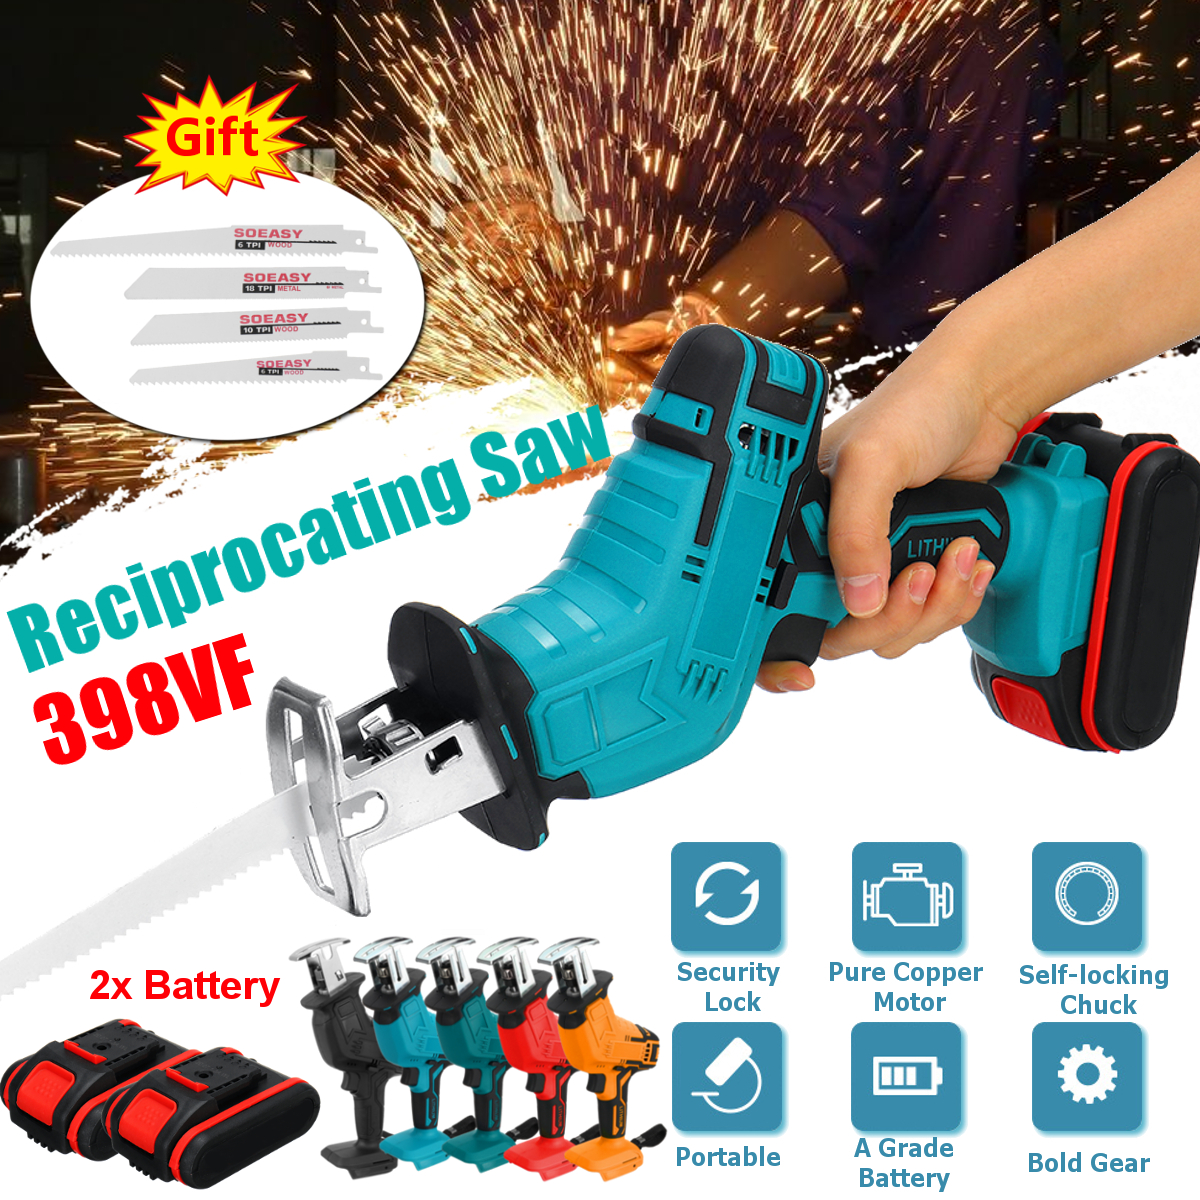 398VF-Reciprocating-Saw-Variable-Speed-Cordless-Electric-Saw-w-2-Batteries--4-Blades-Wood-Metal-Plas-1874646-1